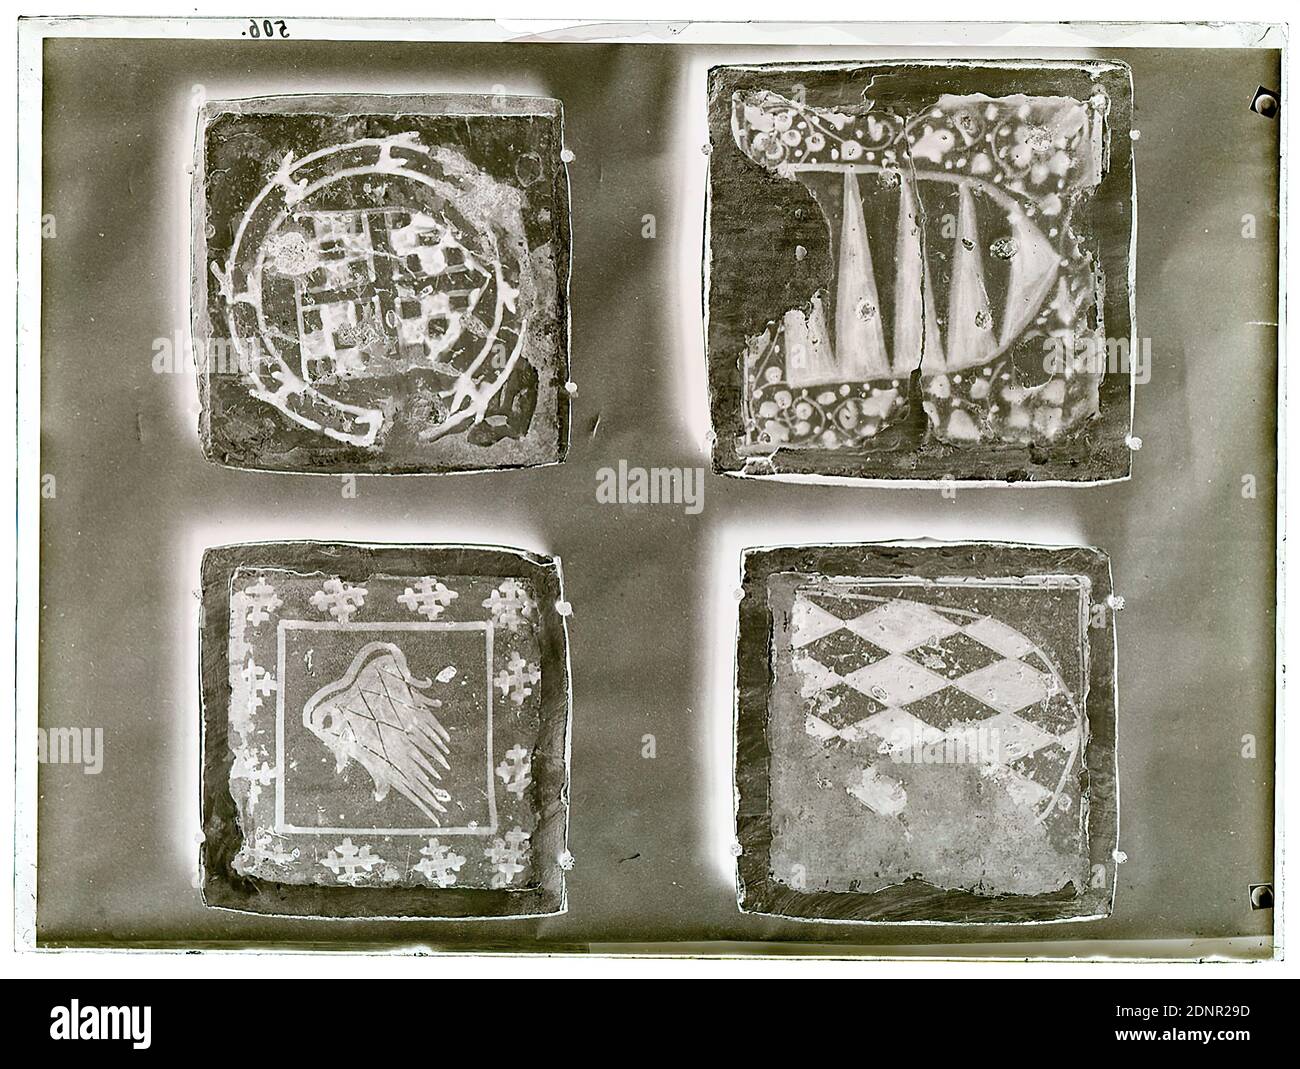 Wilhelm Weimar, tiles, glass negative, black and white negative process, total: height: 23.8 cm; width: 17.8 cm, numbered: top left : in black ink: 506, coat of arms (state symbol), work of applied art (ceramics), tiles, tiles, bricks (building materials), coat of arms shield, heraldic symbol, ornaments, architectural details Stock Photo